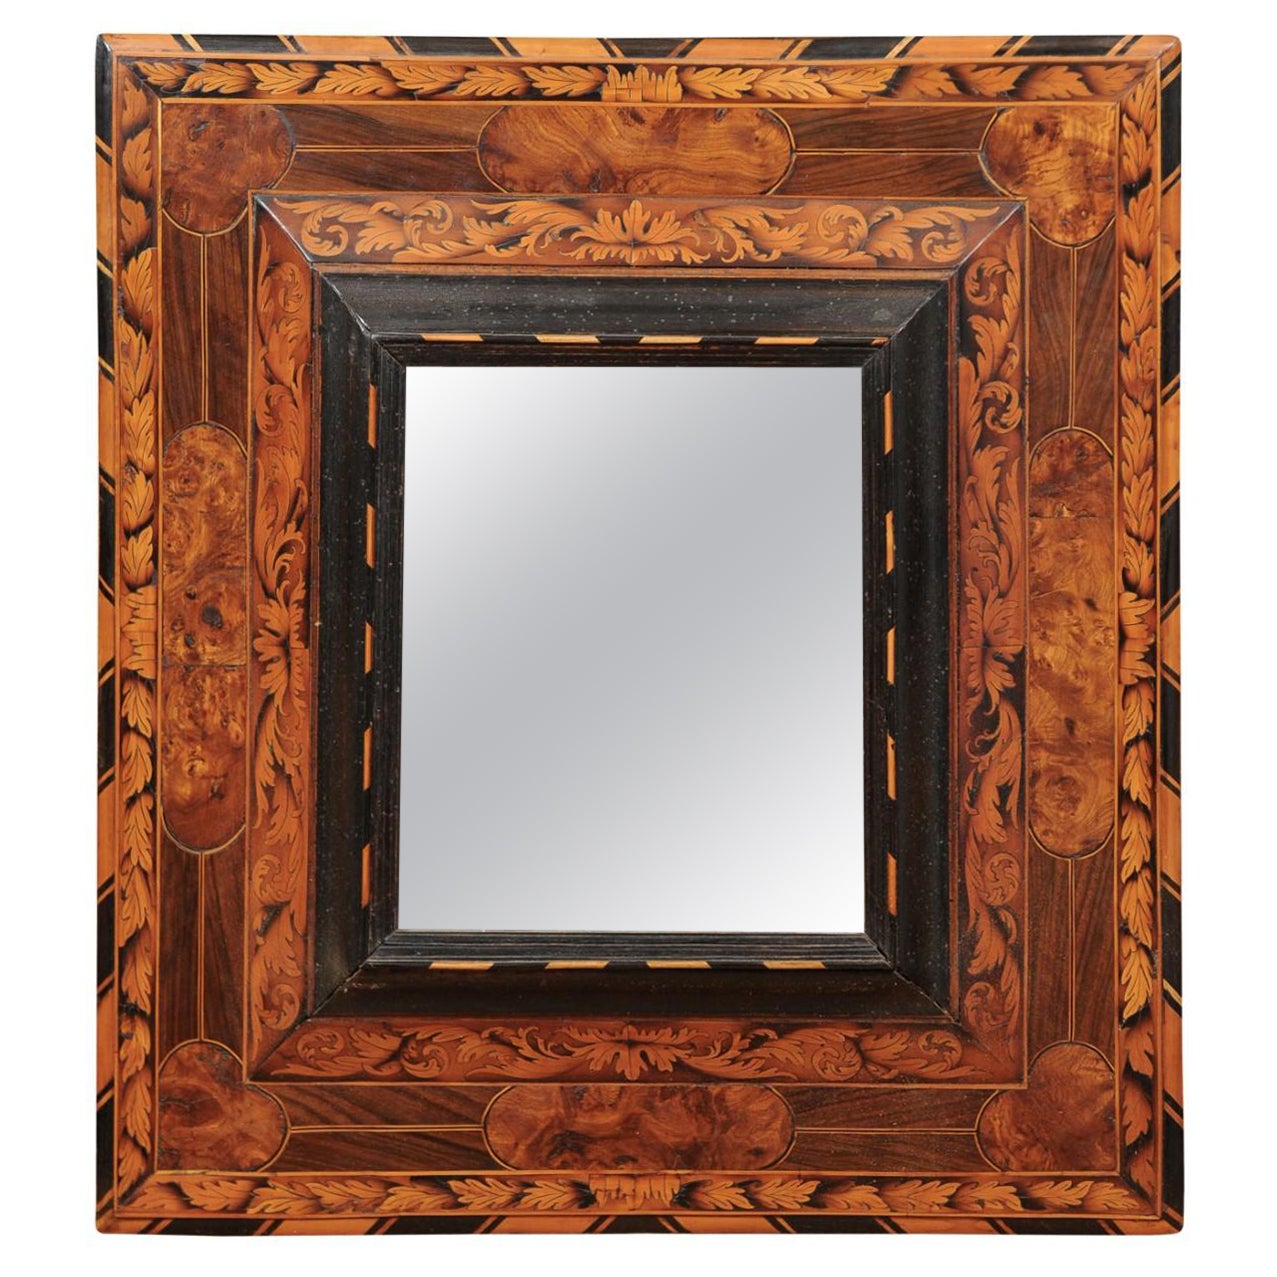 Late 17th Century French Inlaid Marquetry and Ebonized Mirror